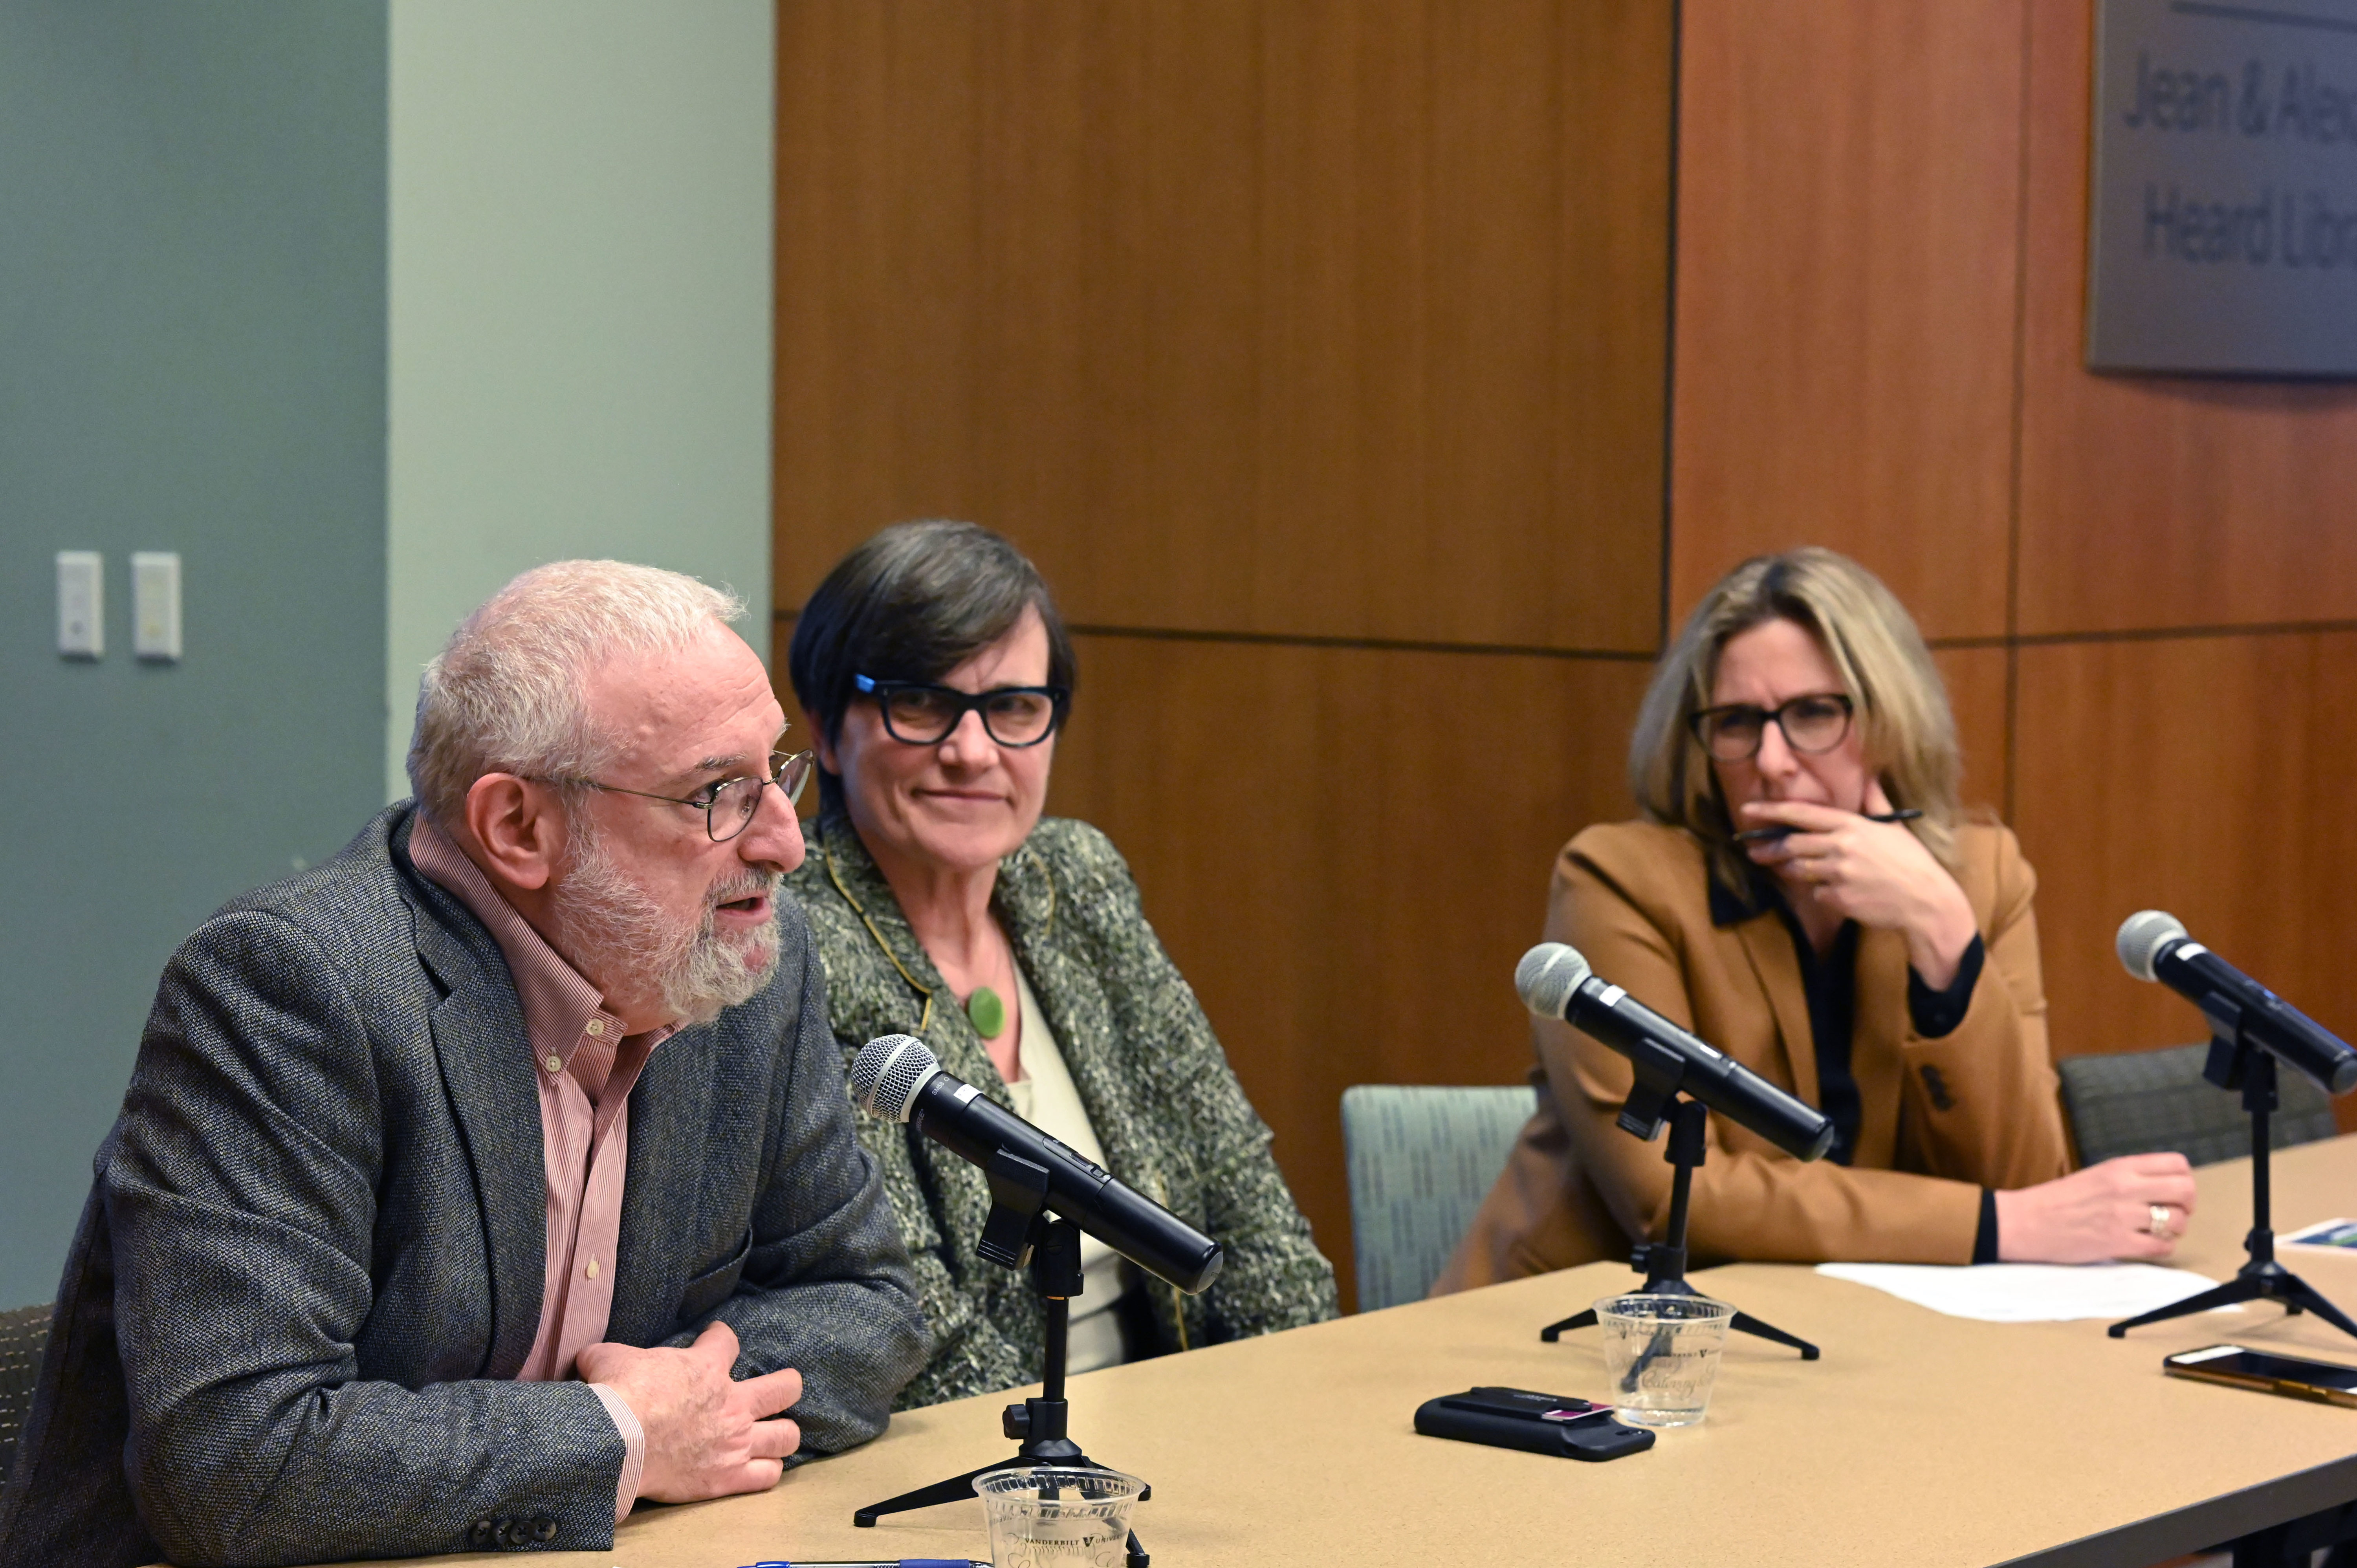 James Grossman, Paula Krebs, and Holly Tucker speak at a panel discussion